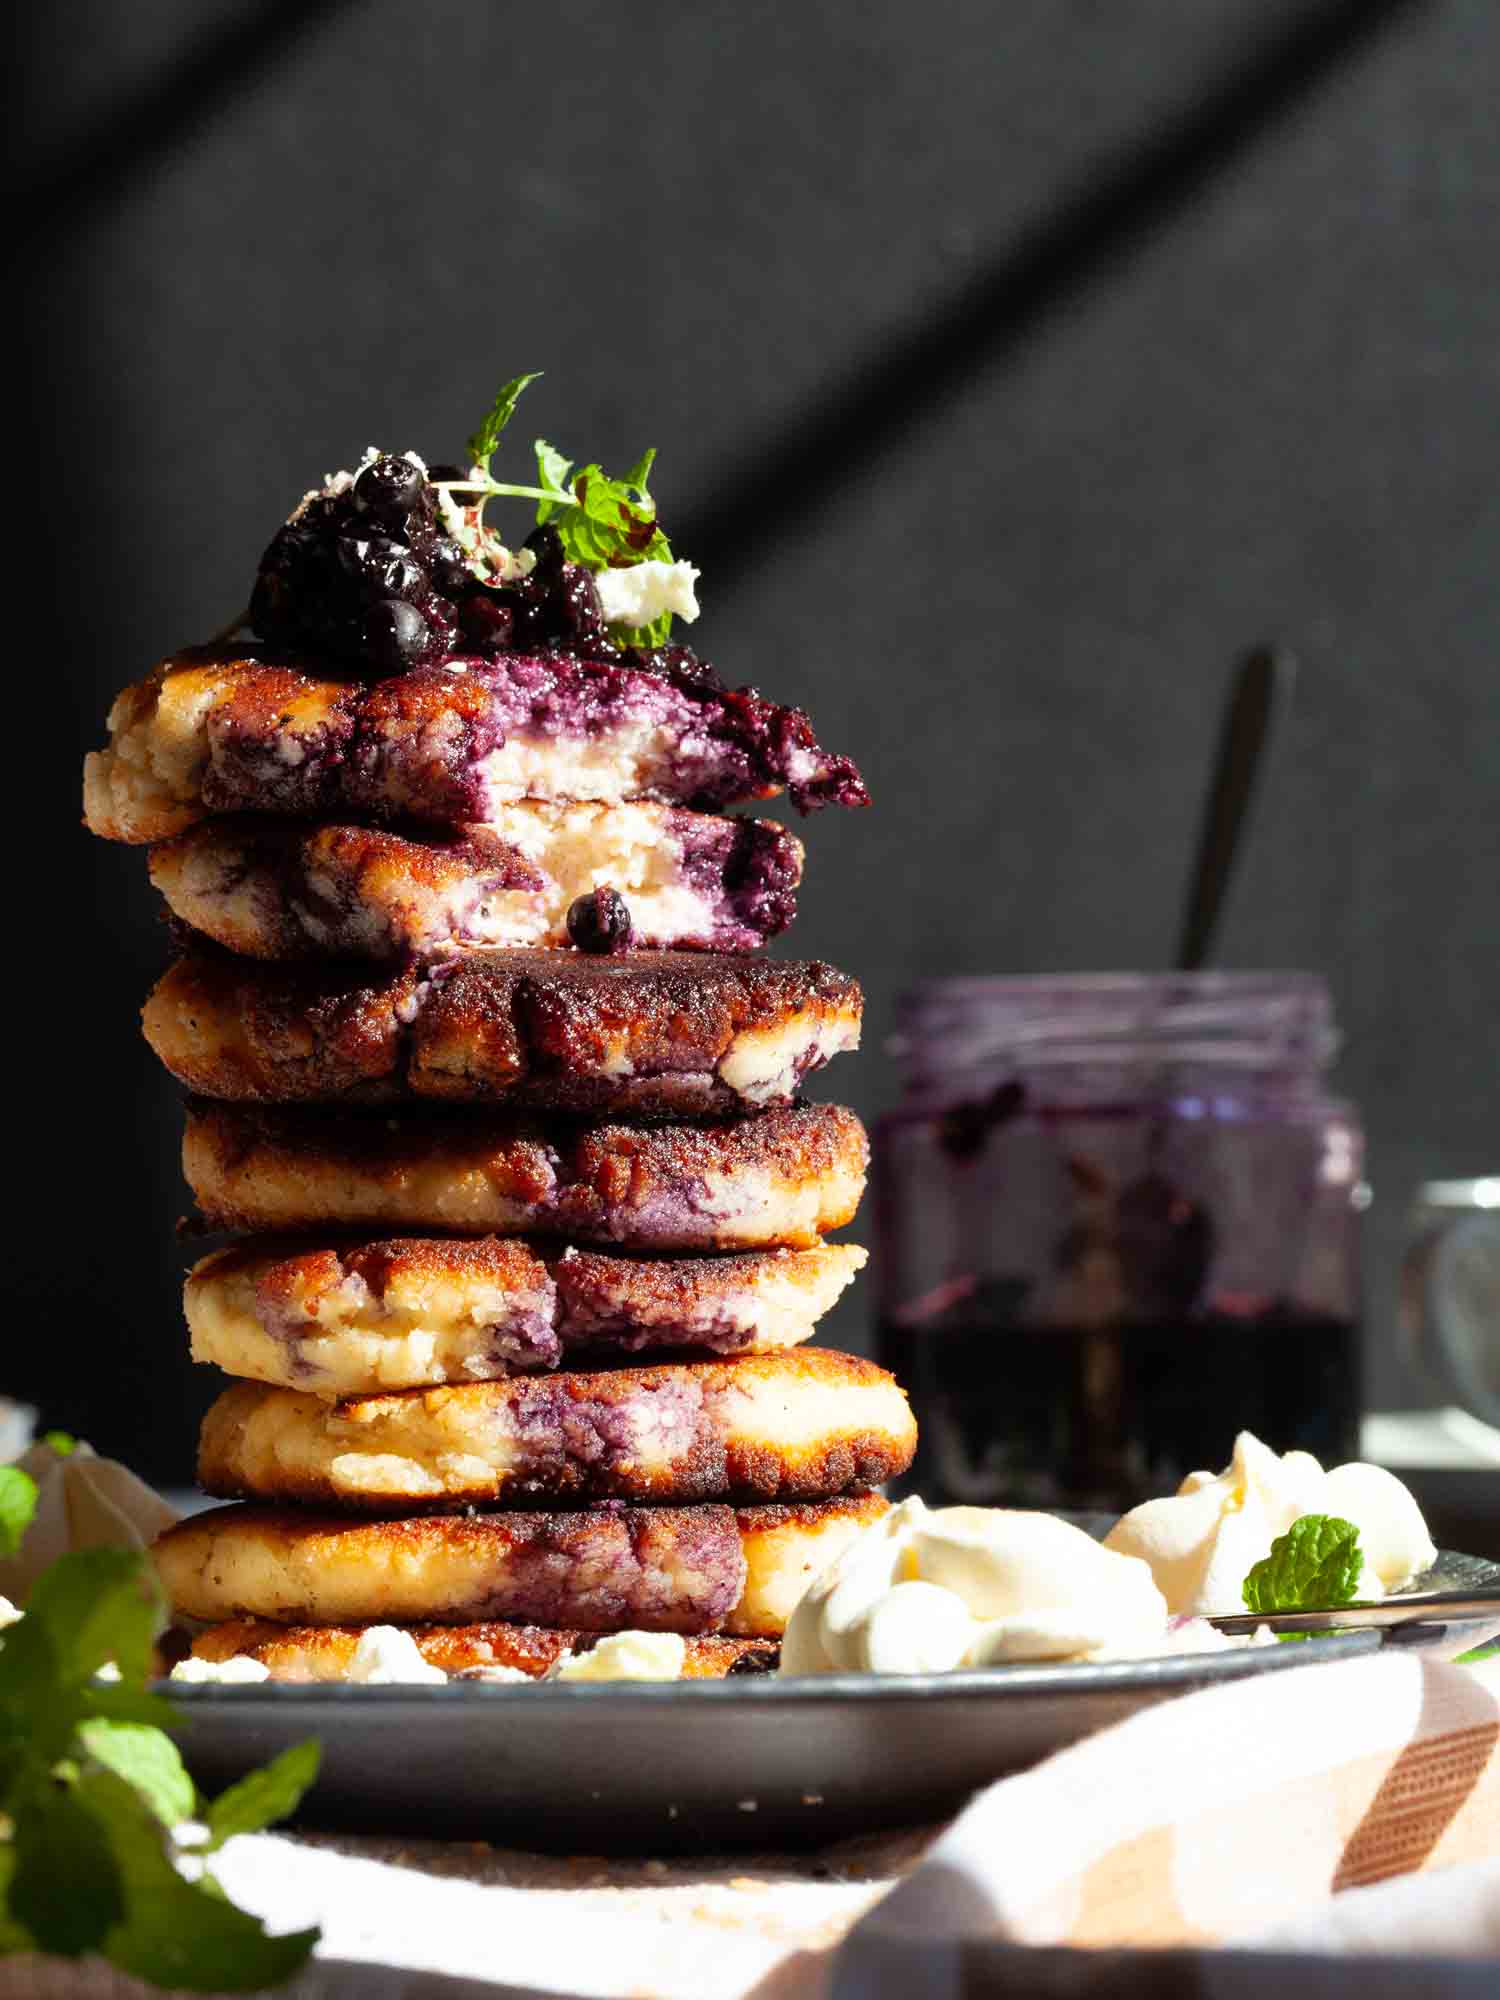 Cheese and coconut flour pancakes